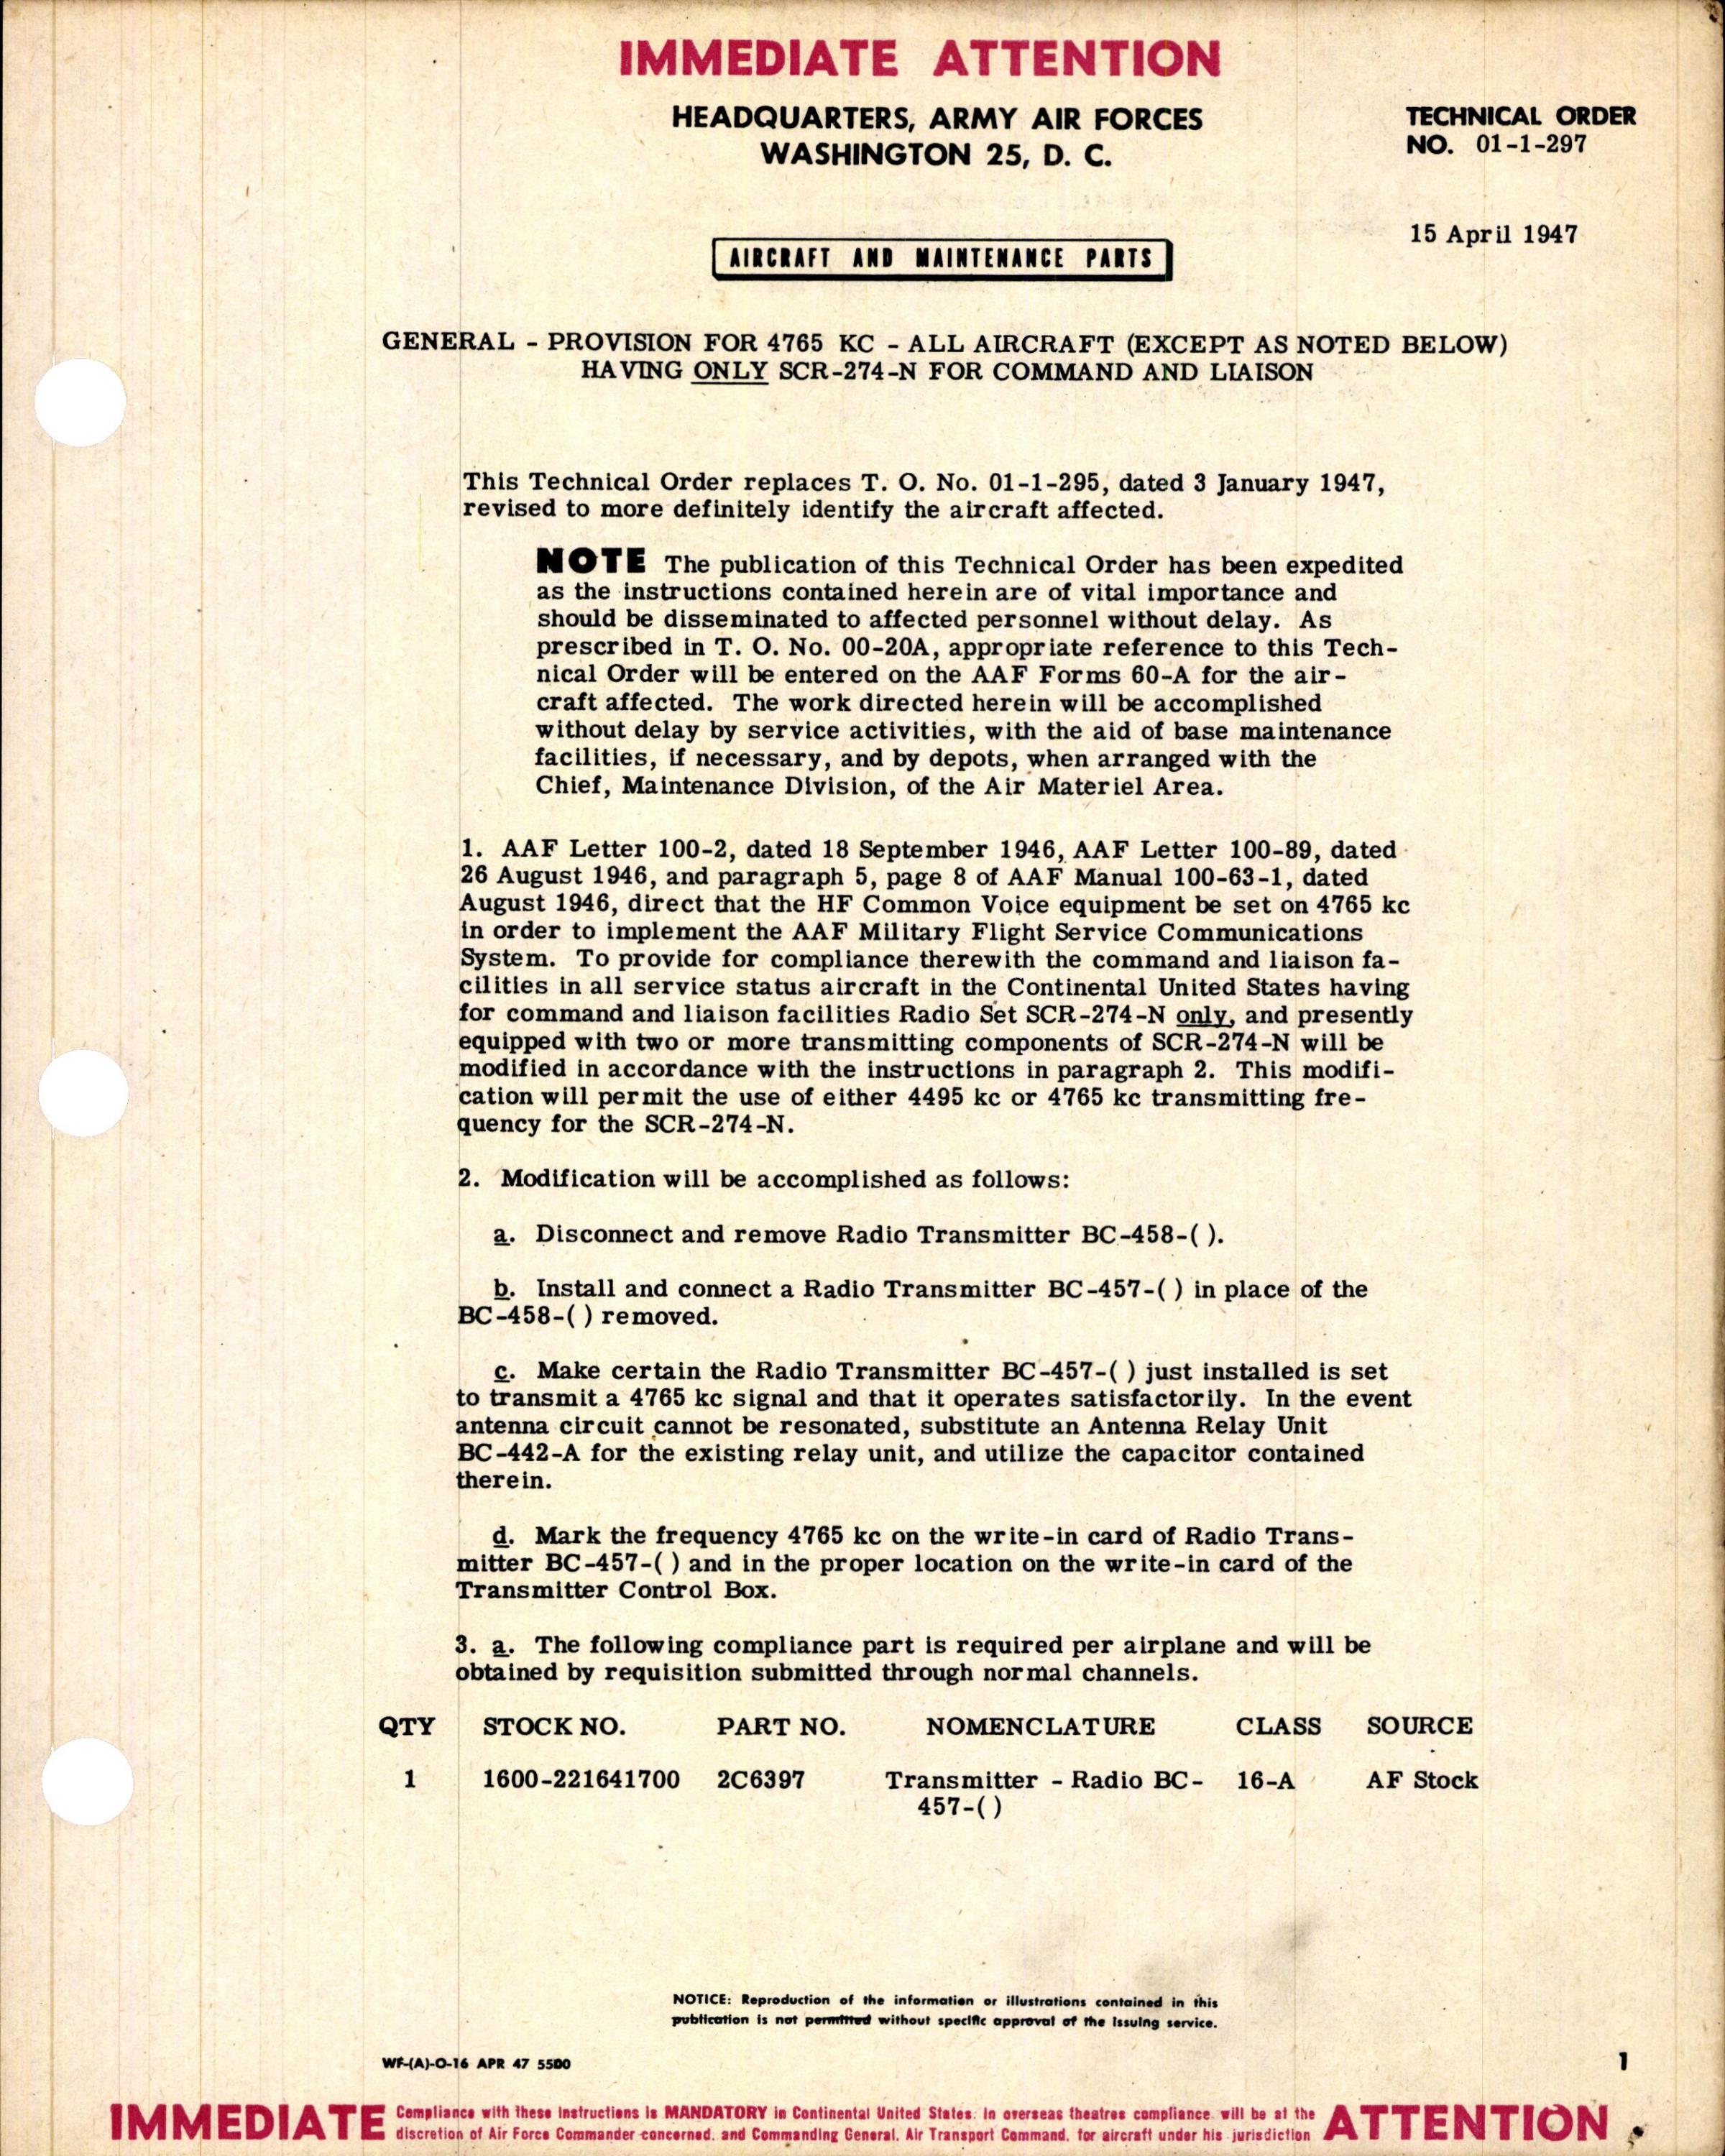 Sample page 1 from AirCorps Library document: Provision for 4765 KC for All Aircraft with Only SCR-274-N